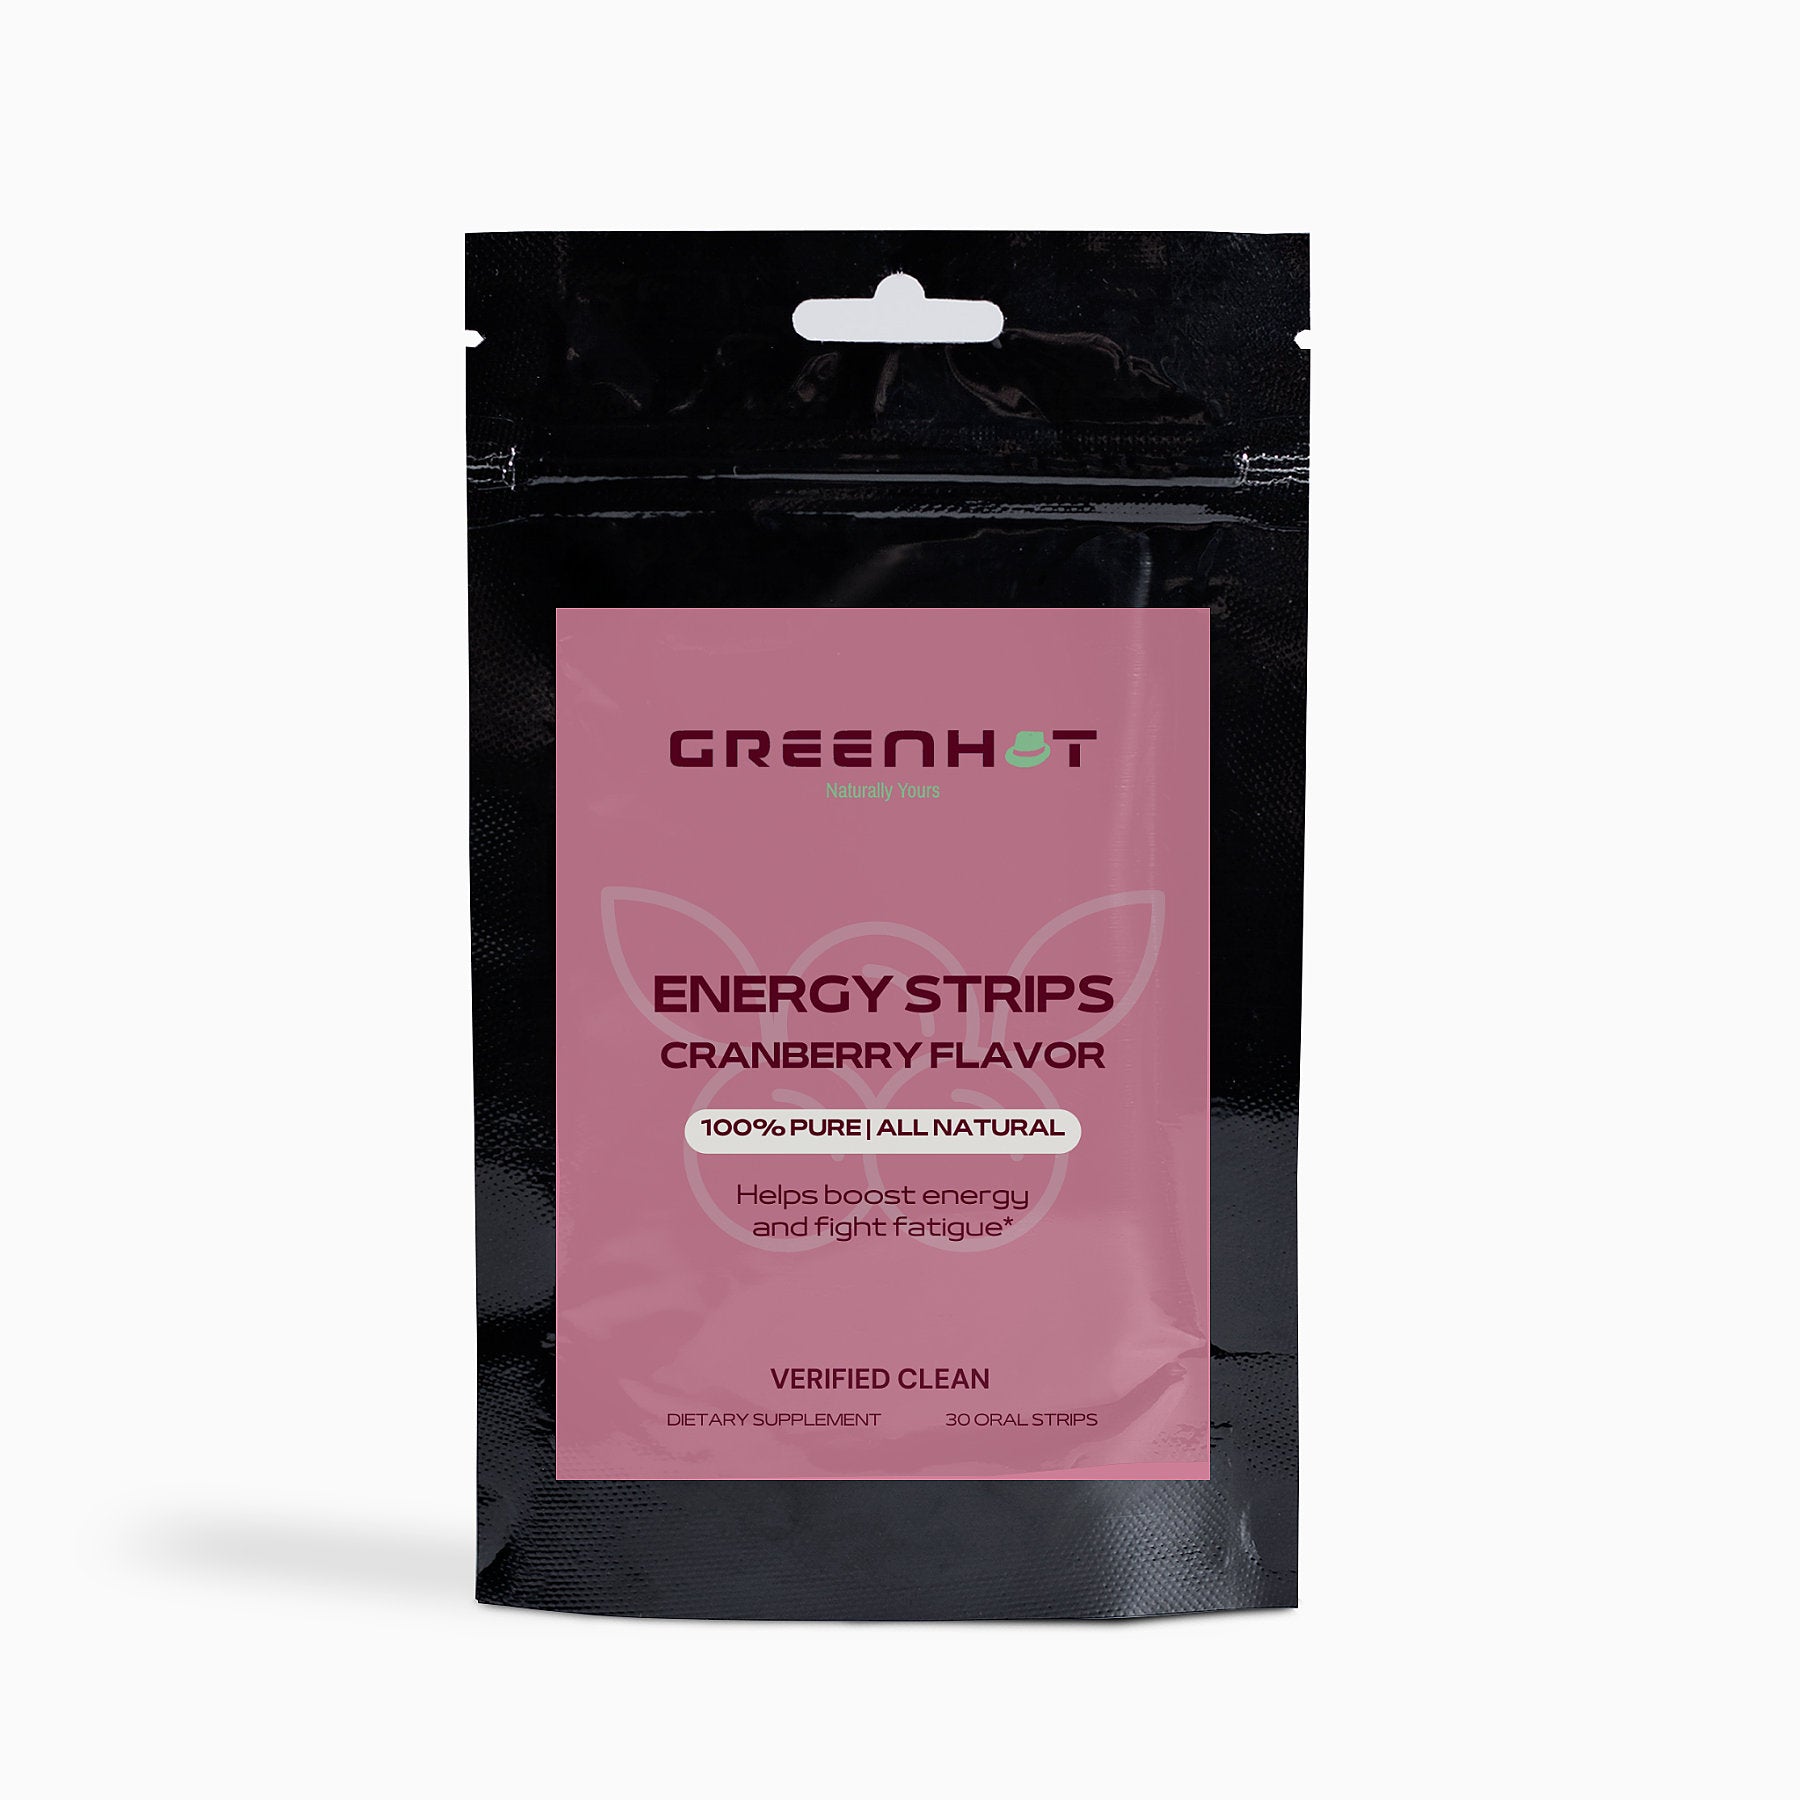 A black and pink package of GreenHat energy strips in cranberry flavor, advertising as all-natural and providing a quick convenient energy boost.